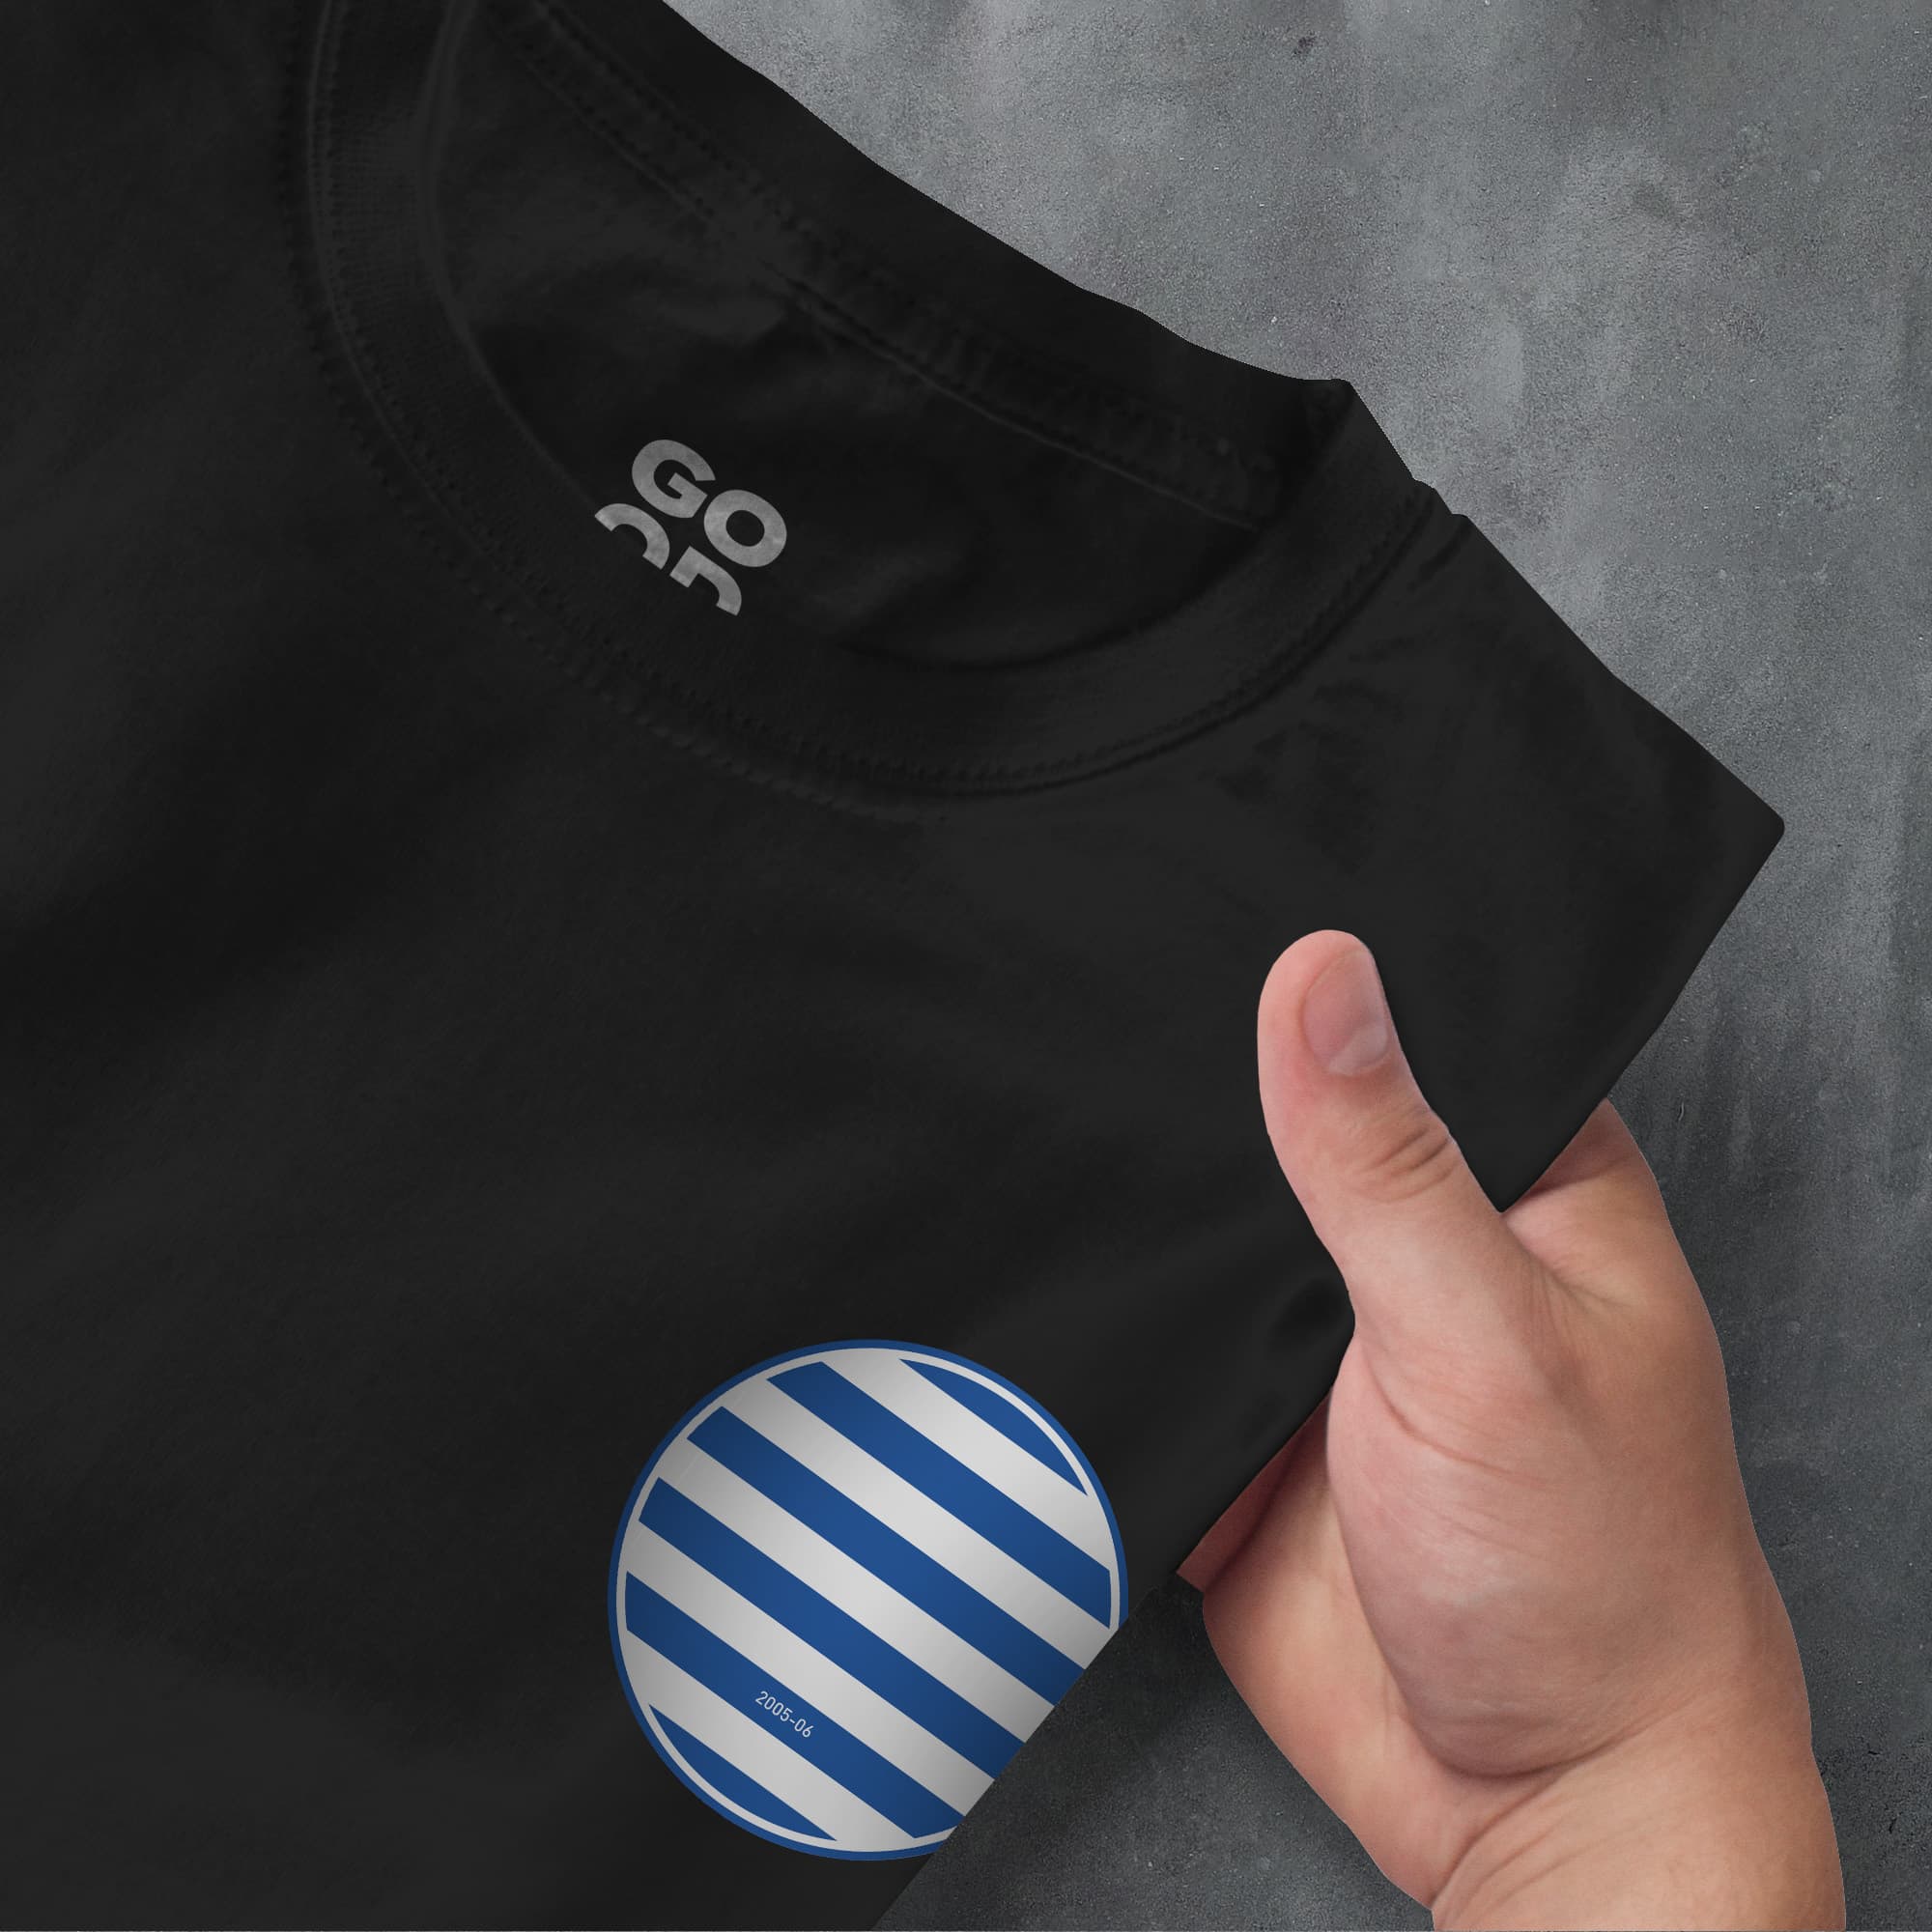 a hand pointing at a black shirt with blue and white stripes